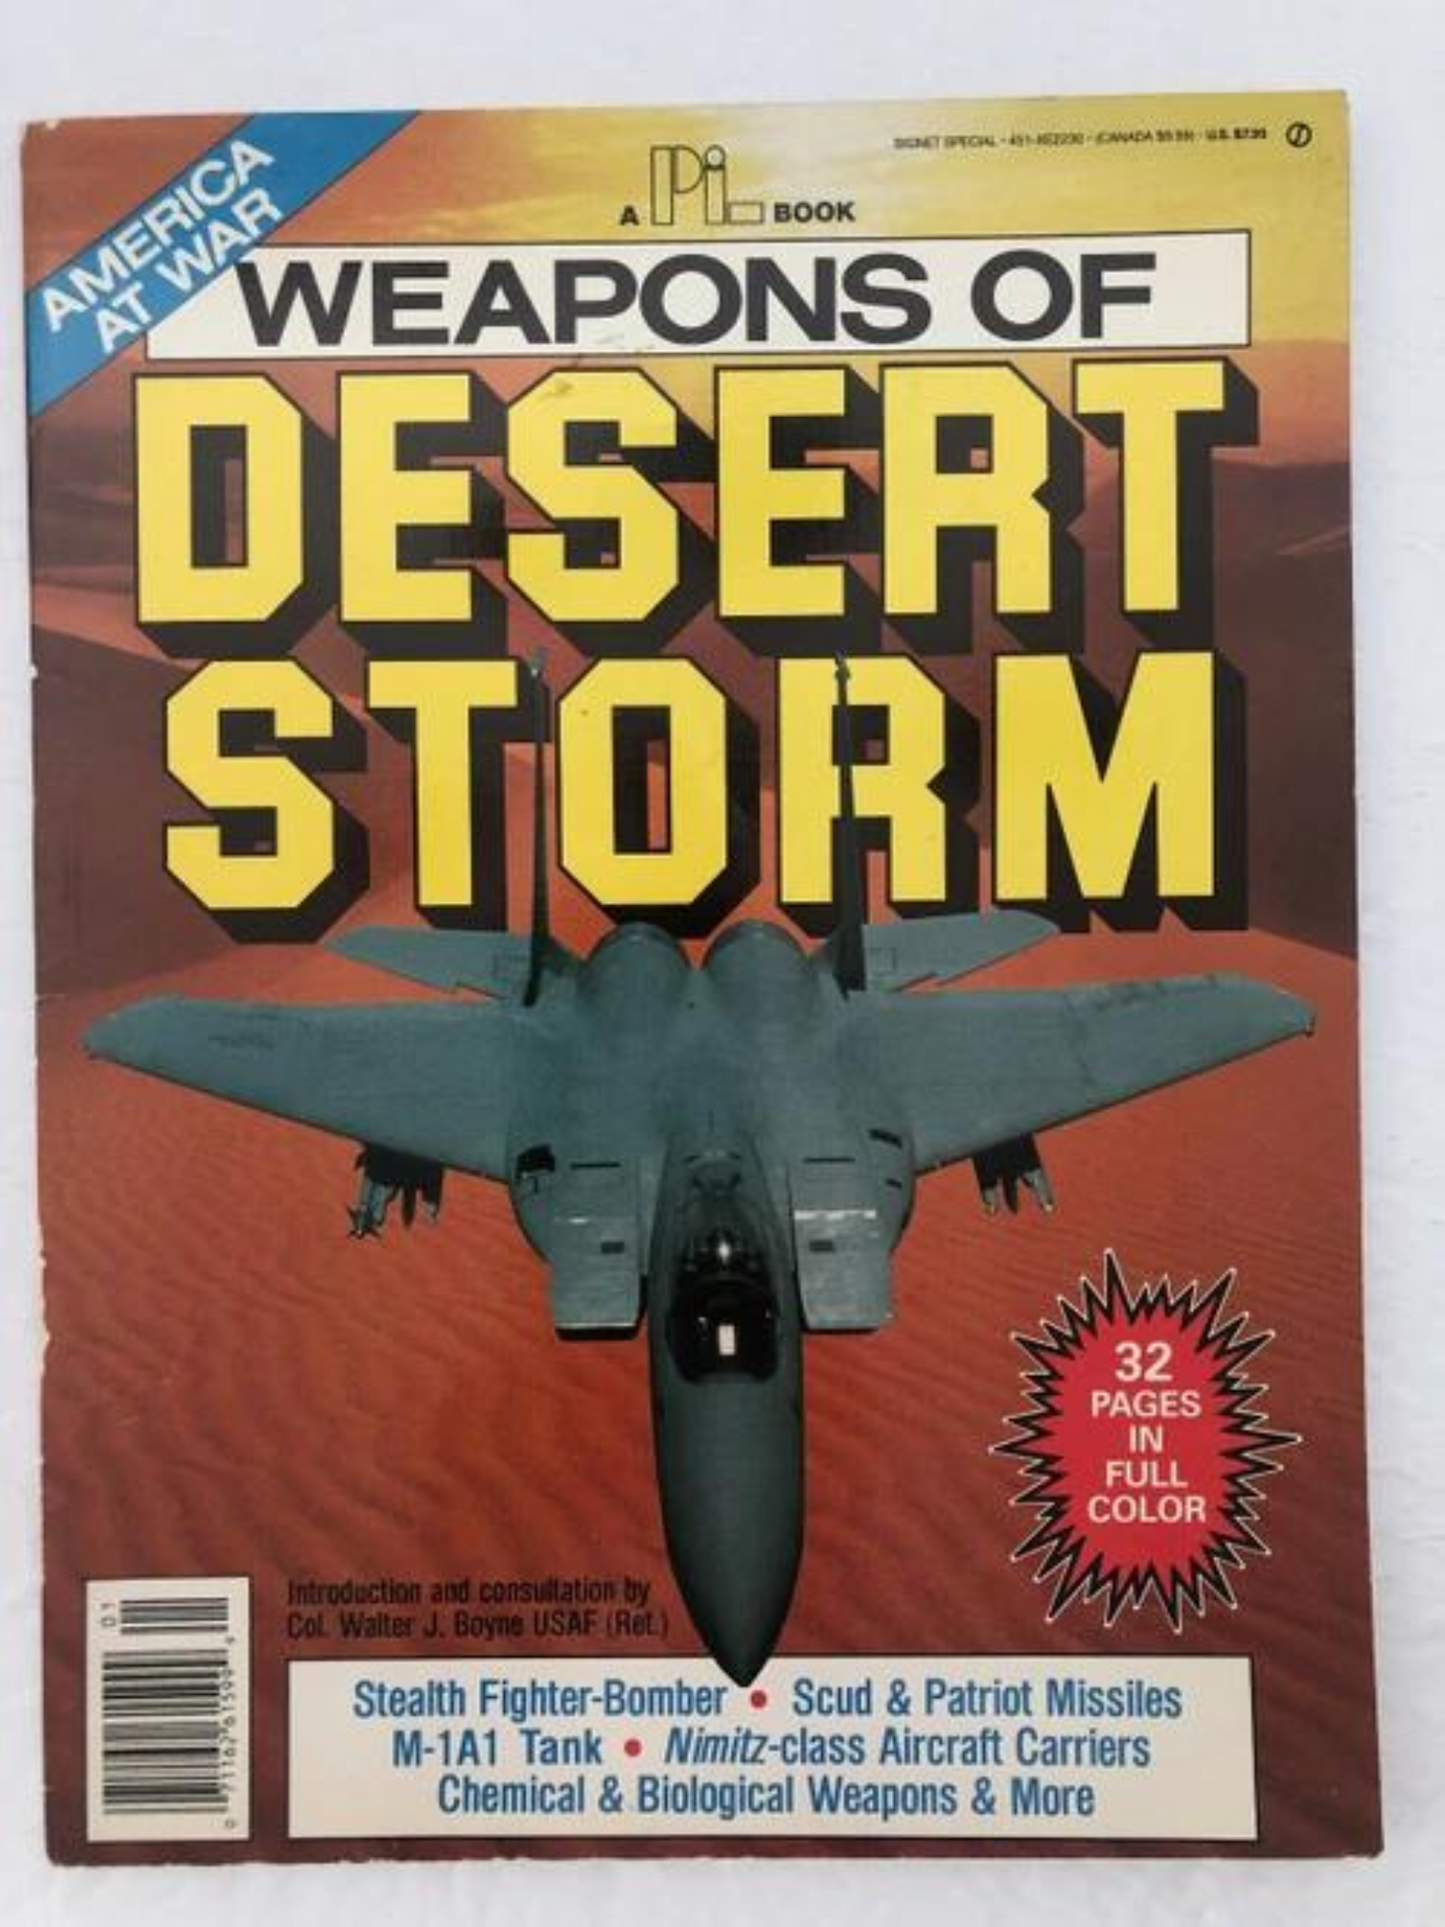 Weapons of Desert Storm by Walter J. Boyne - Very Good Condition